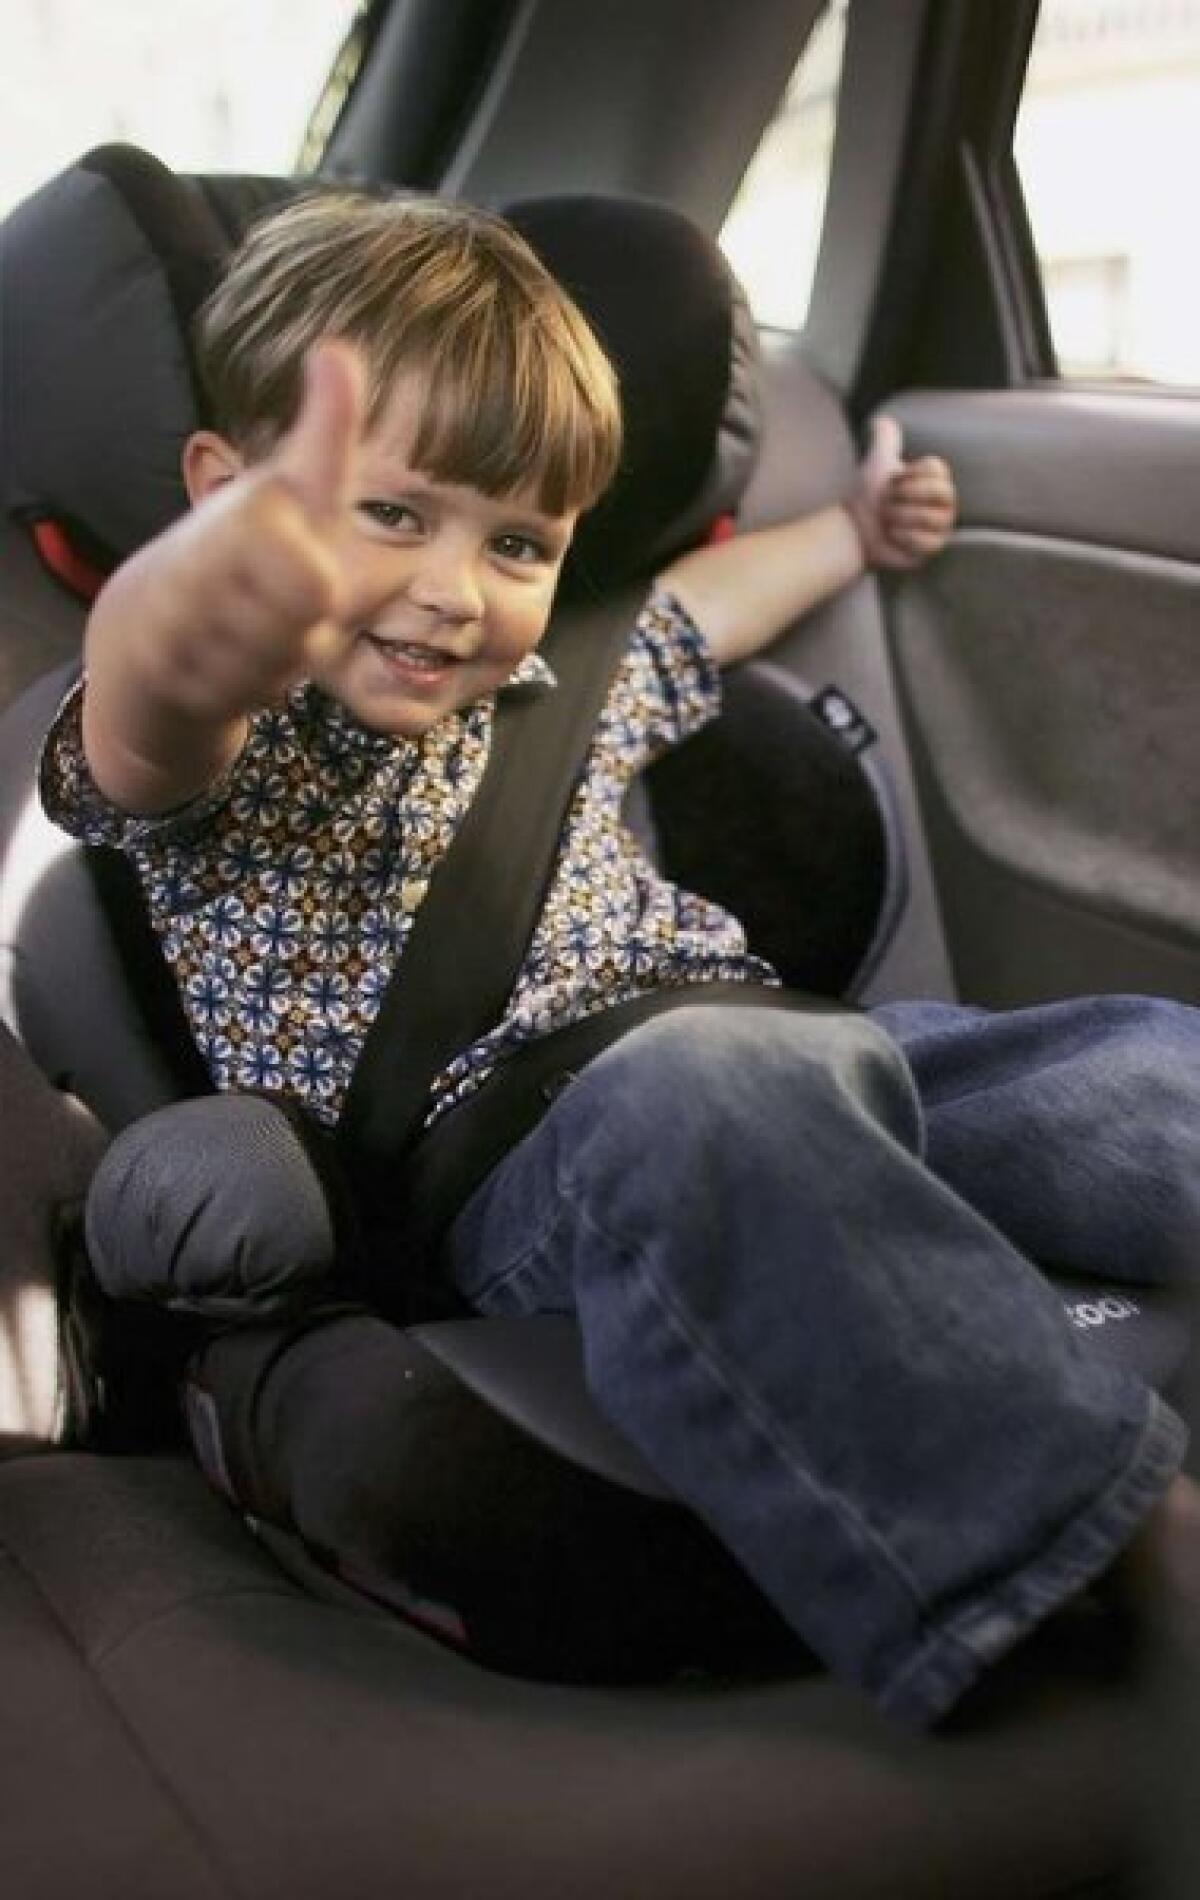 Booster seats, like this one, help kids use a car's seat belts safely.